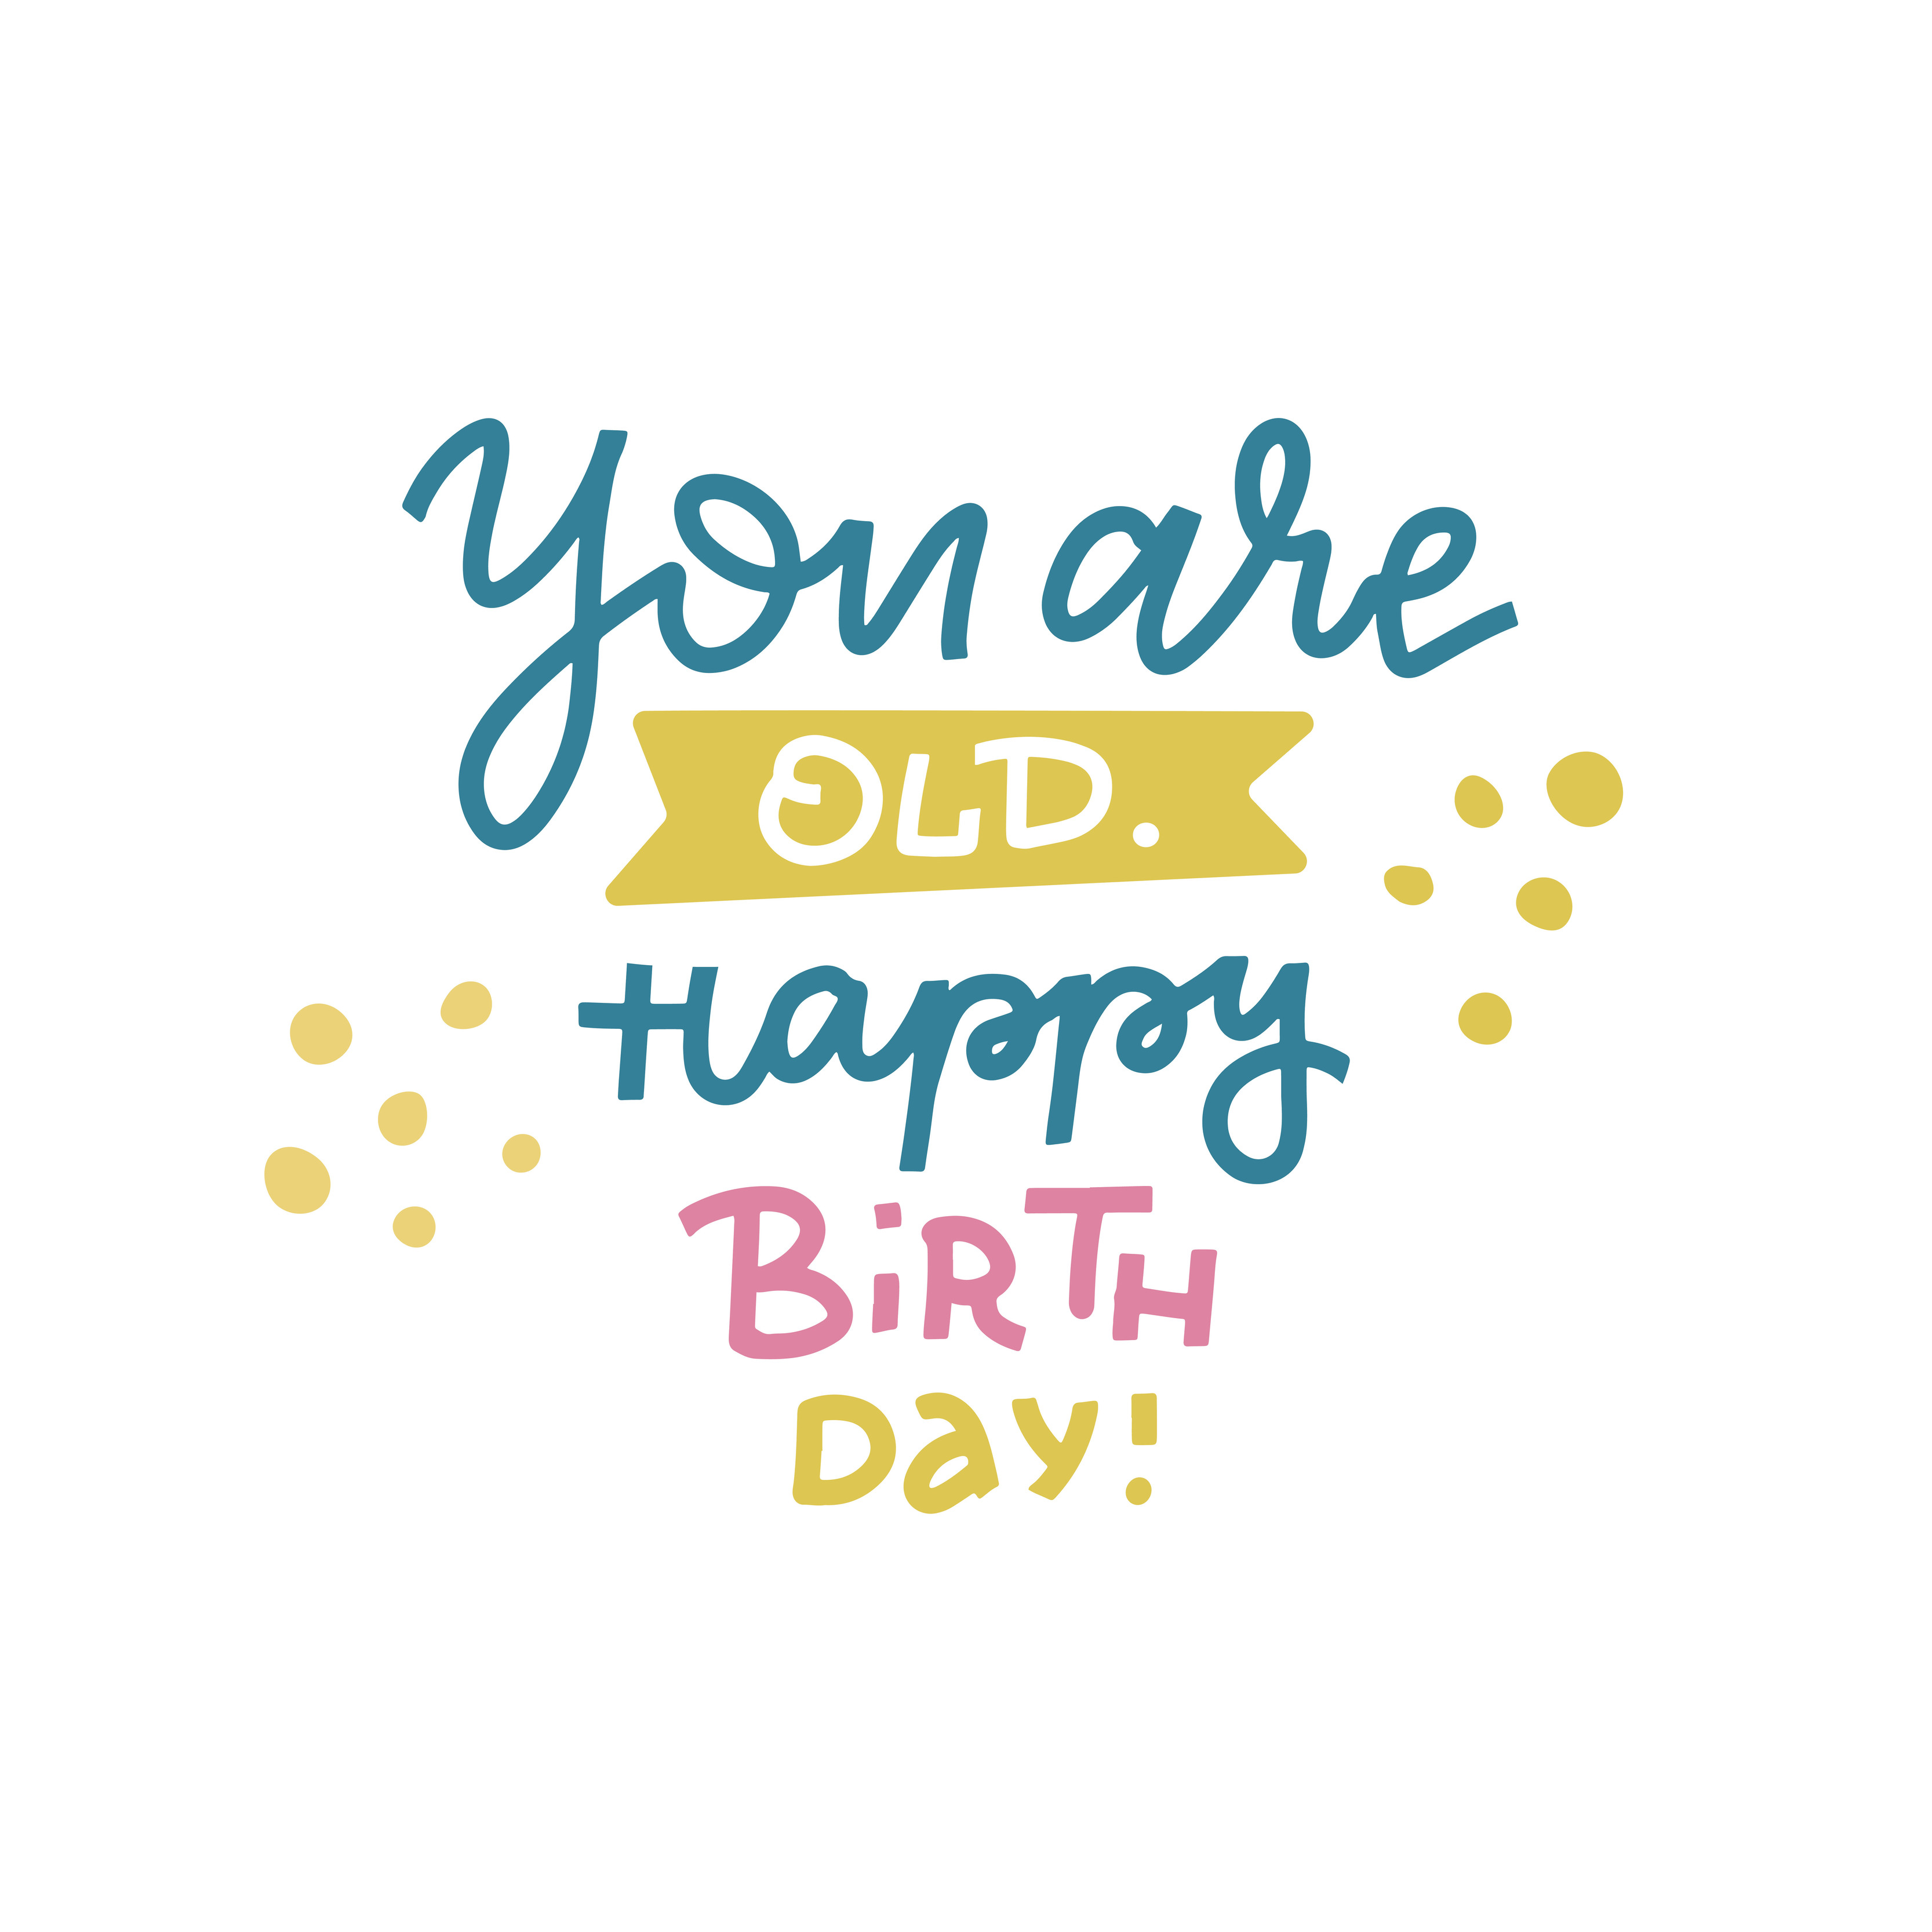 You are old Happy Birthday - Funny, comical birthday slogan. Social media,  poster, card, banner, textile, gift, design element. Hand drawn lettering  quote, phrase on white background in doodle style 5977777 Vector